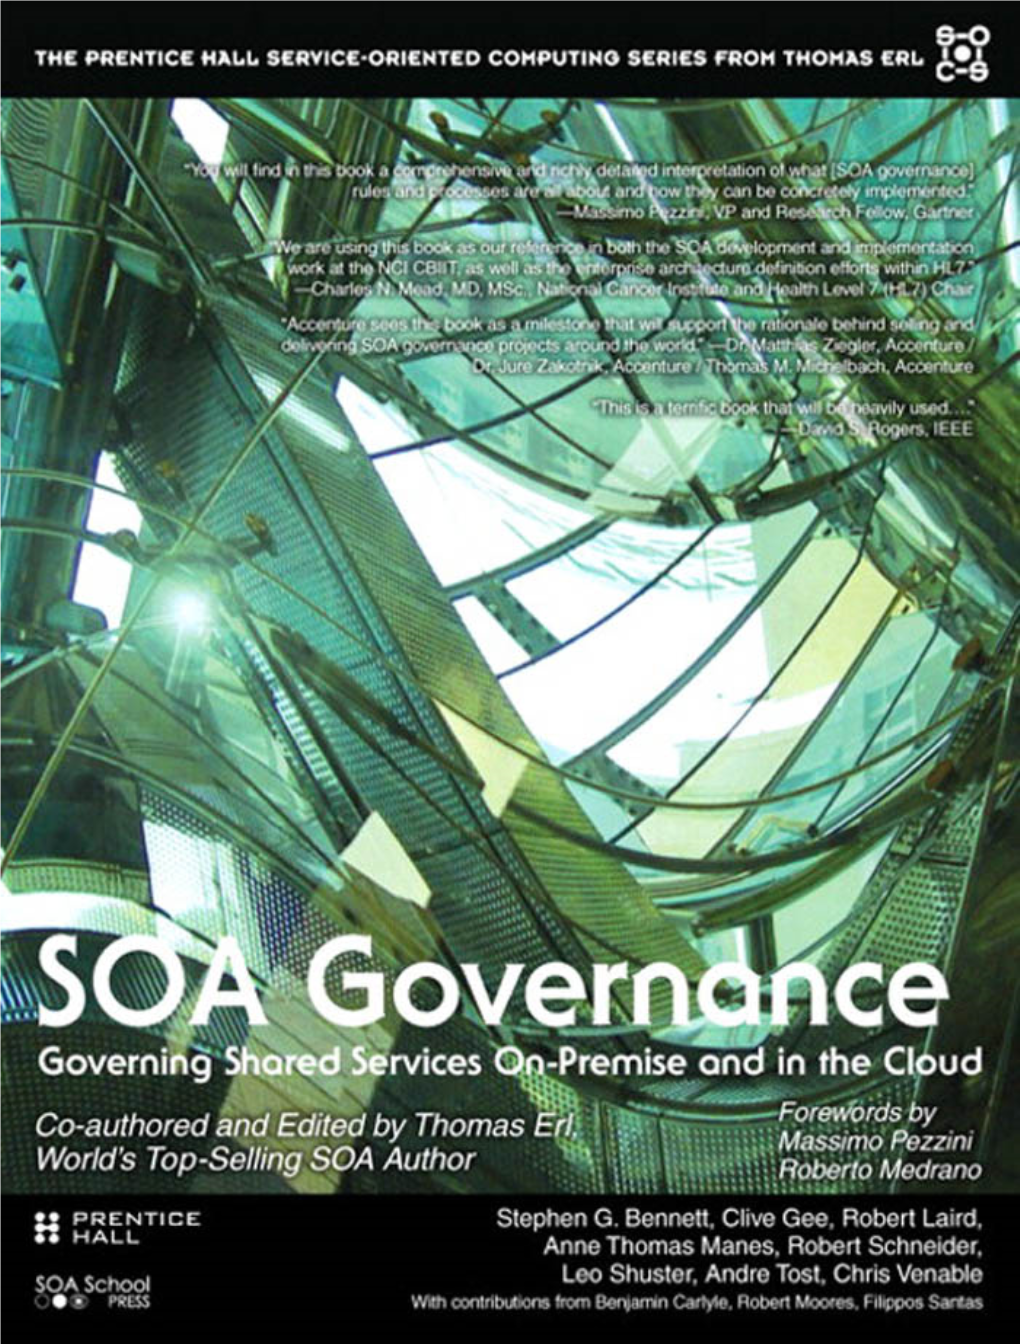 SOA Governance : Governing Shared Services On-Premise and in the Cloud / Pamela Janice Yau Thomas Erl